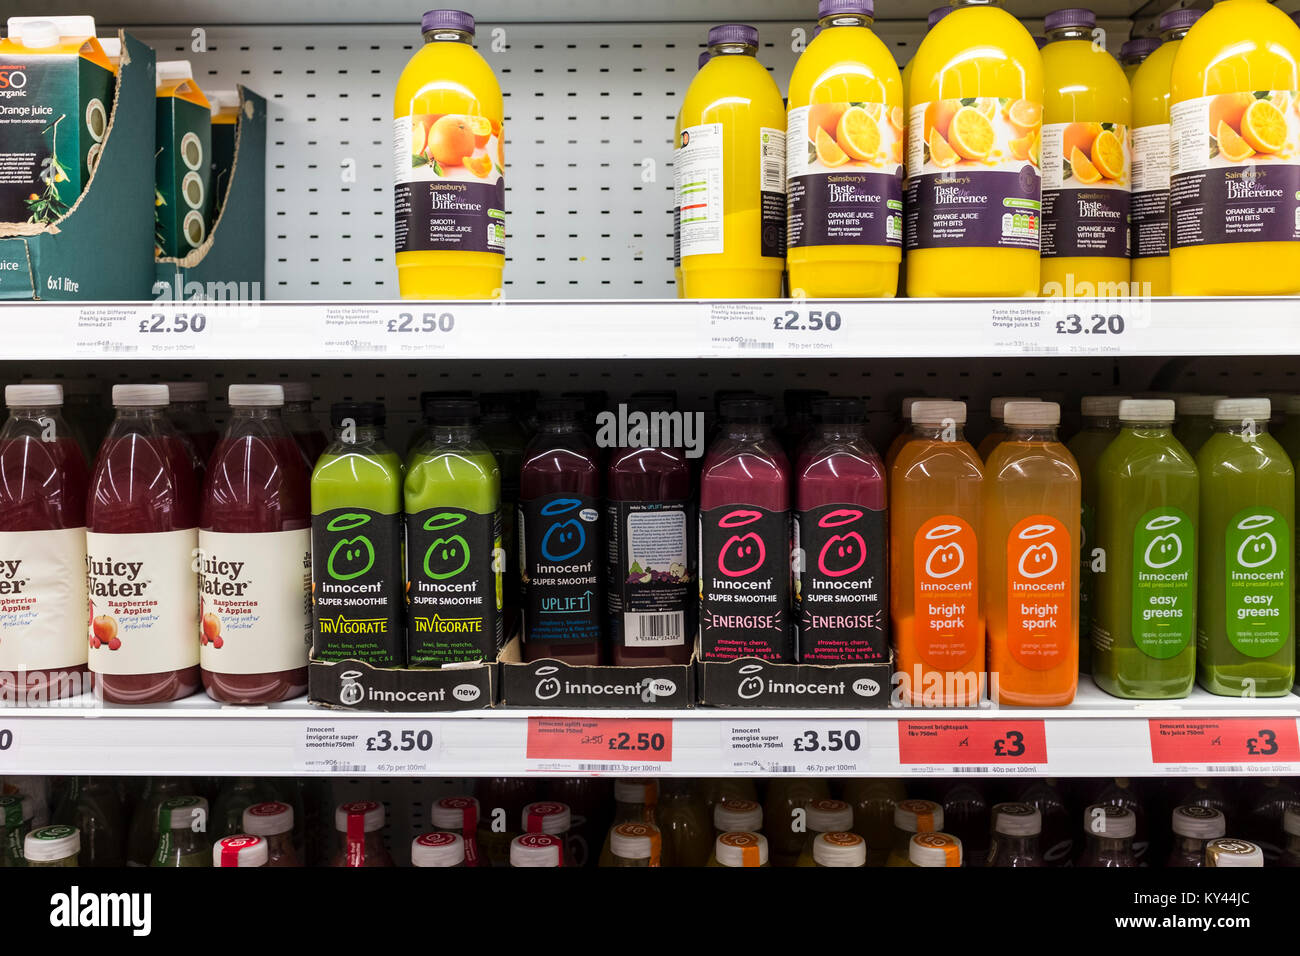 Innocent smoothie and other fruit juices bottles on display on supermarket shelves, UK Stock Photo